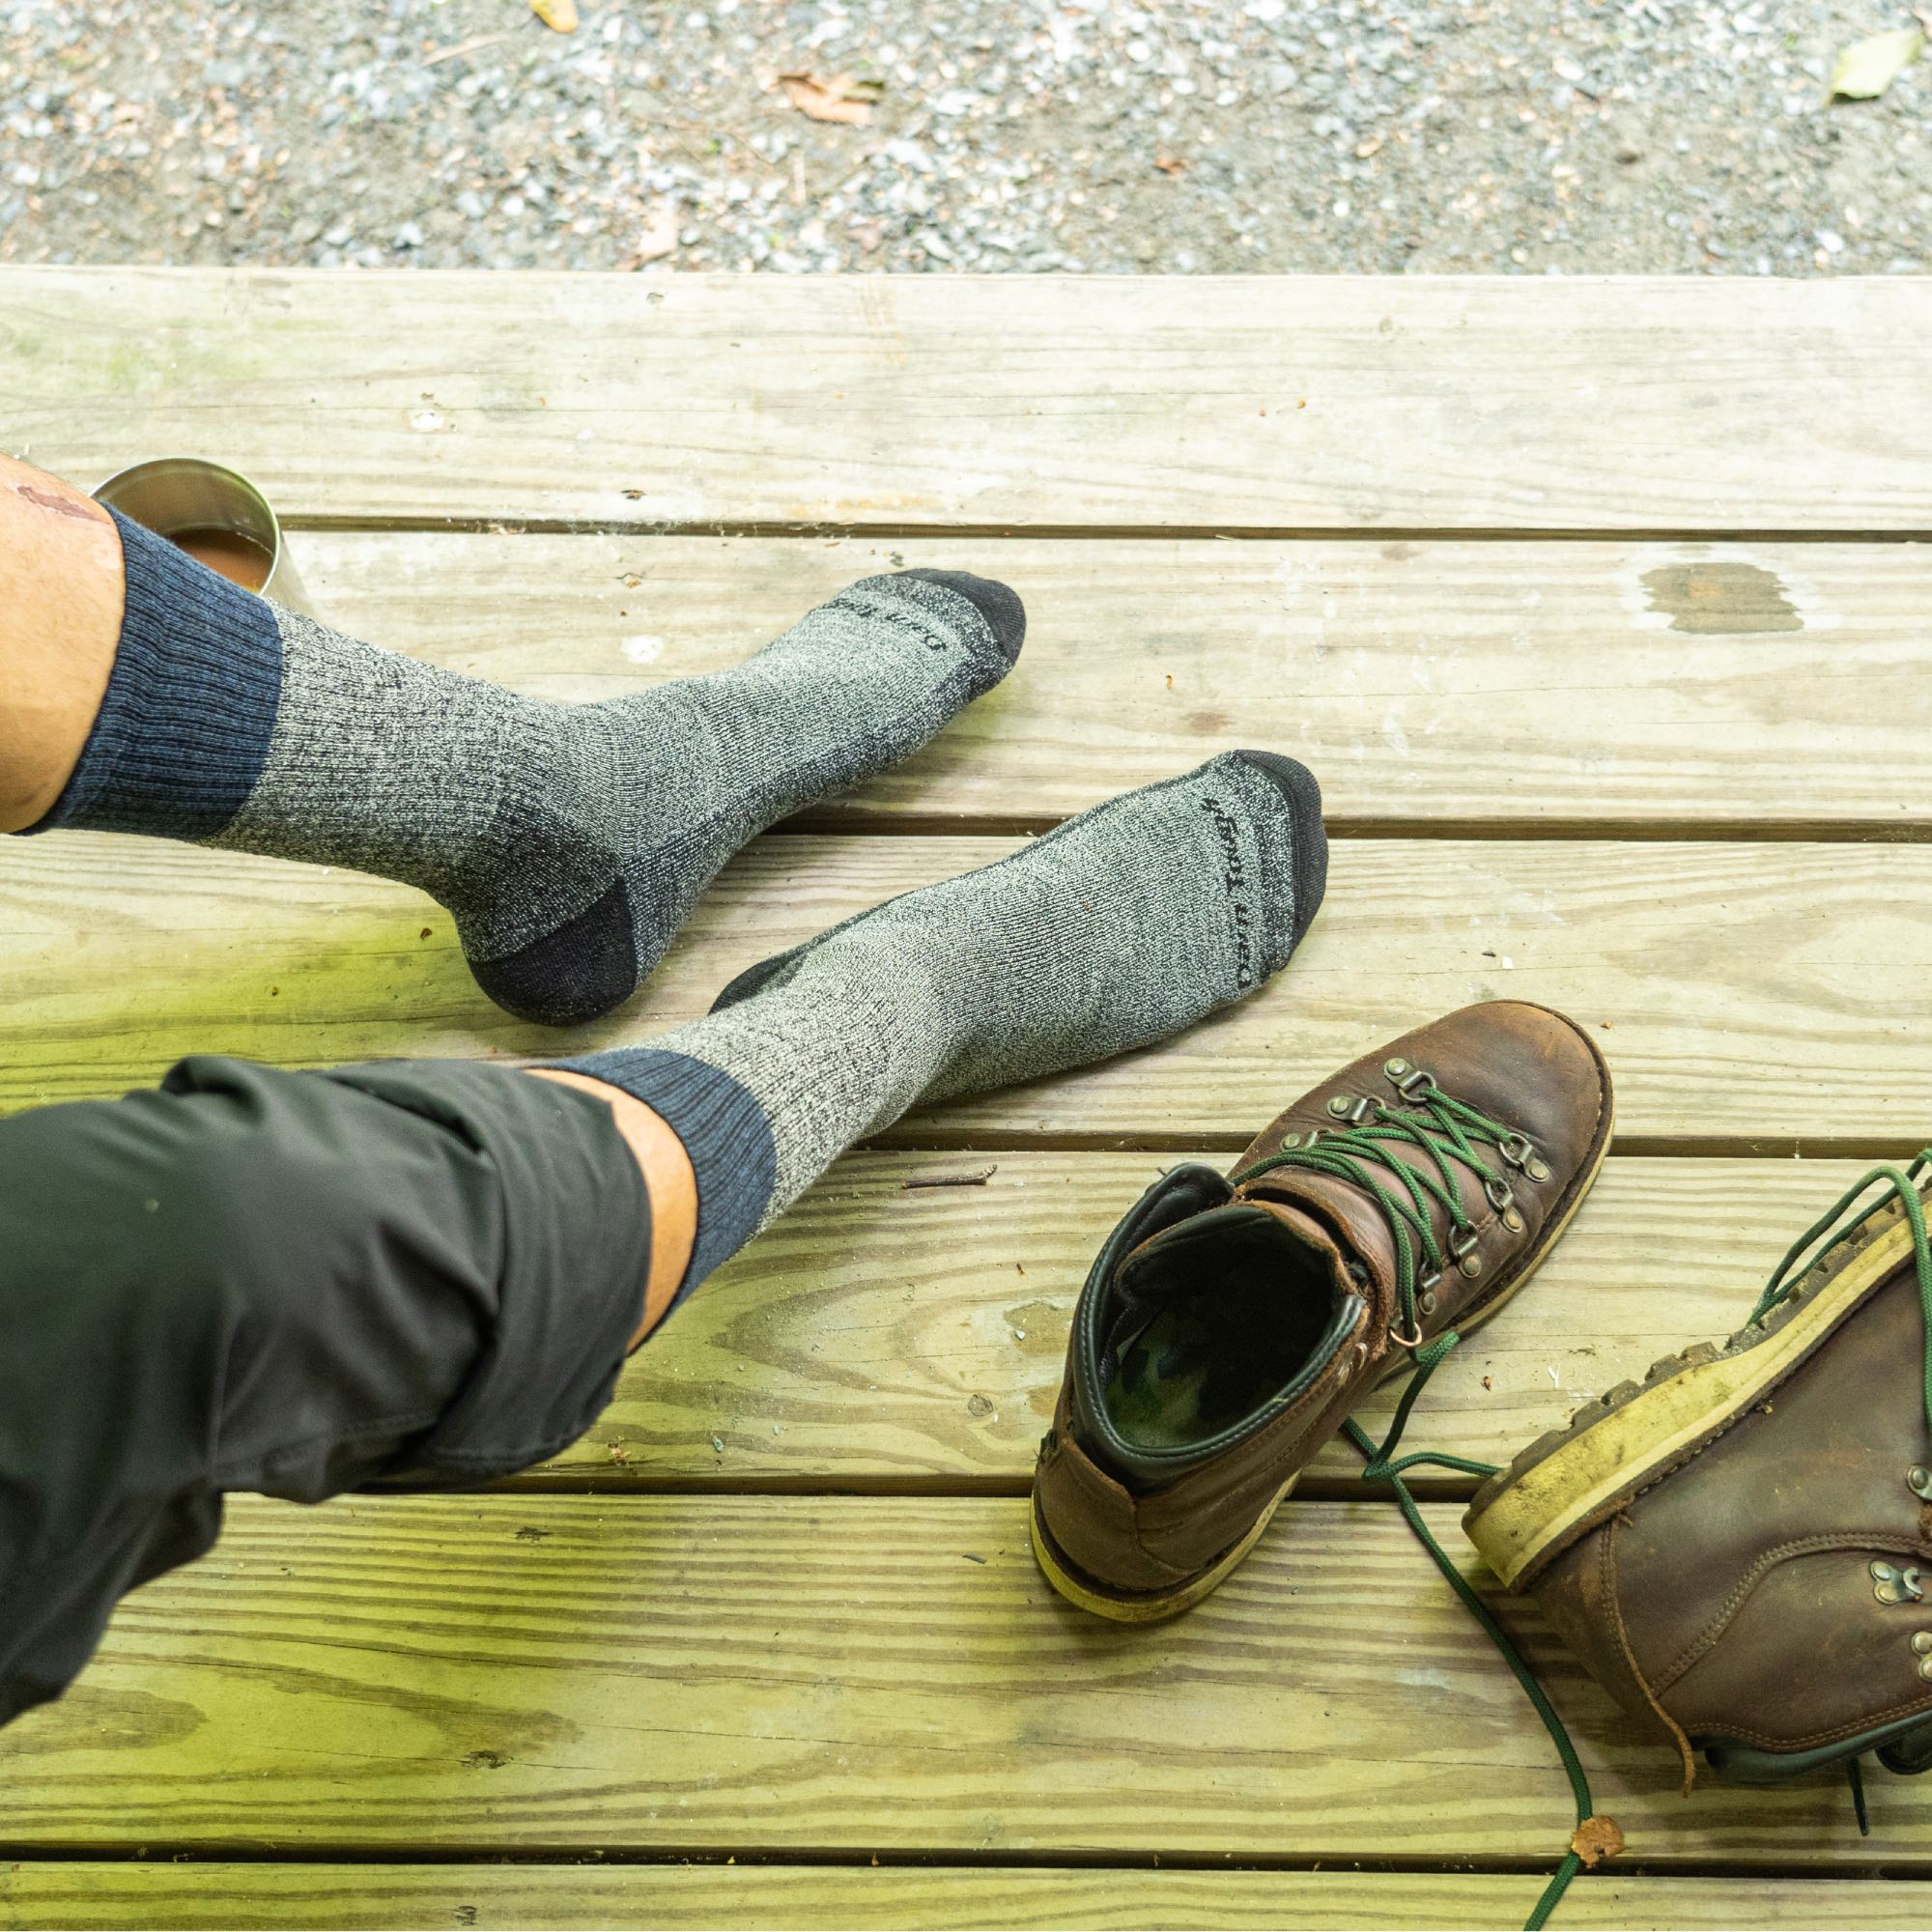 How to Wear Men's Dress Socks  The Definitive Guide to Sock Style